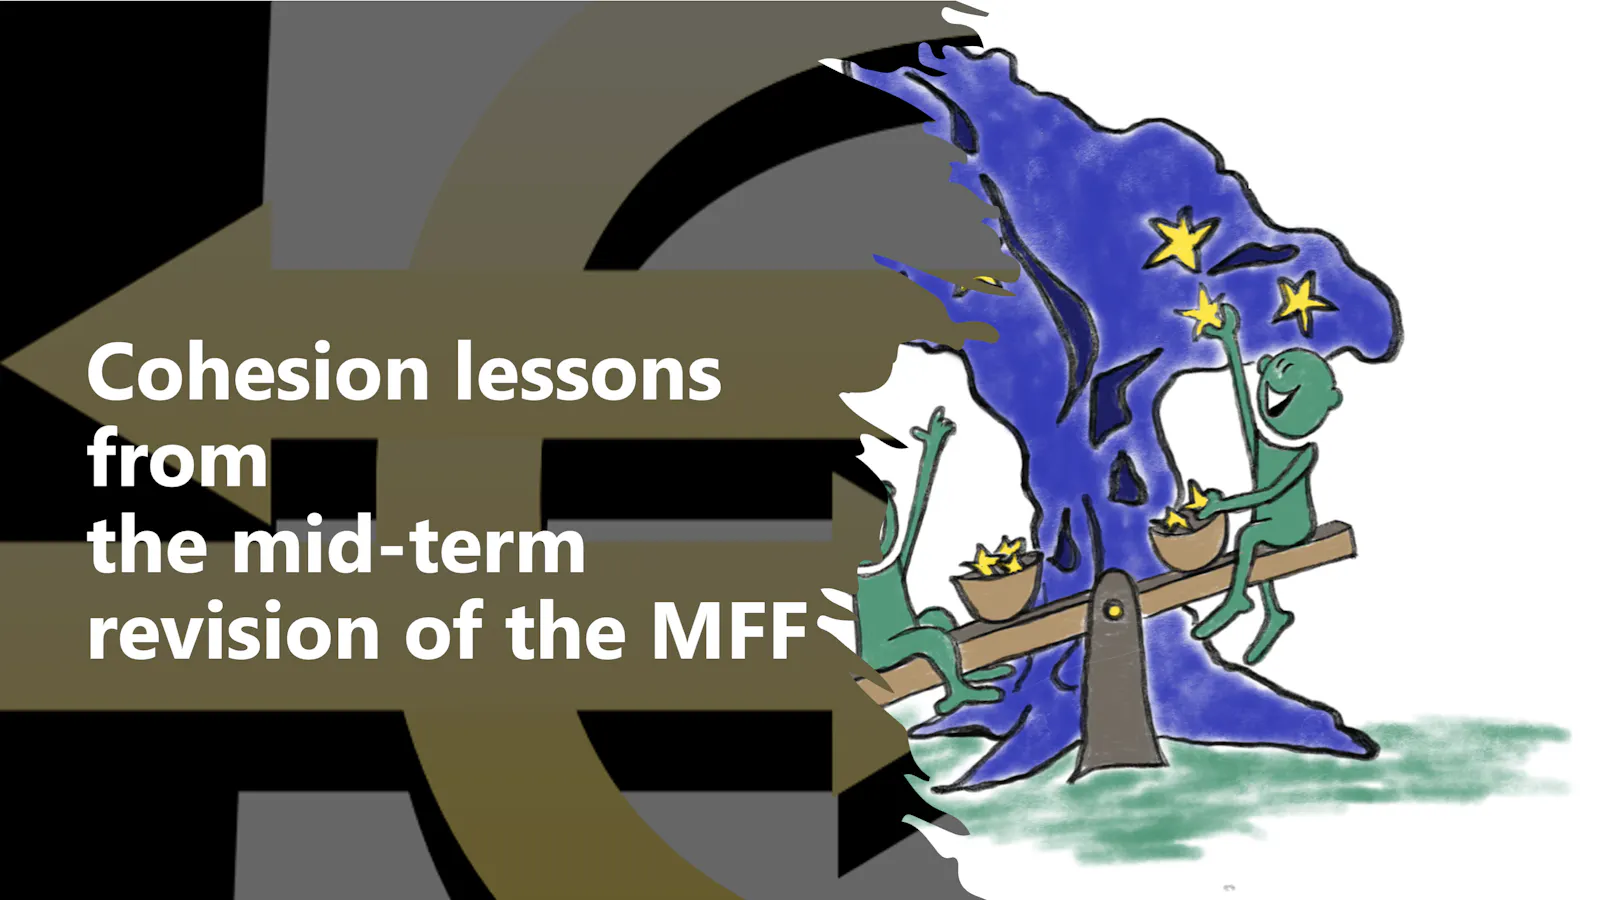 Cohesion lessons from the mid-term revision of the EU multiannual financial framework